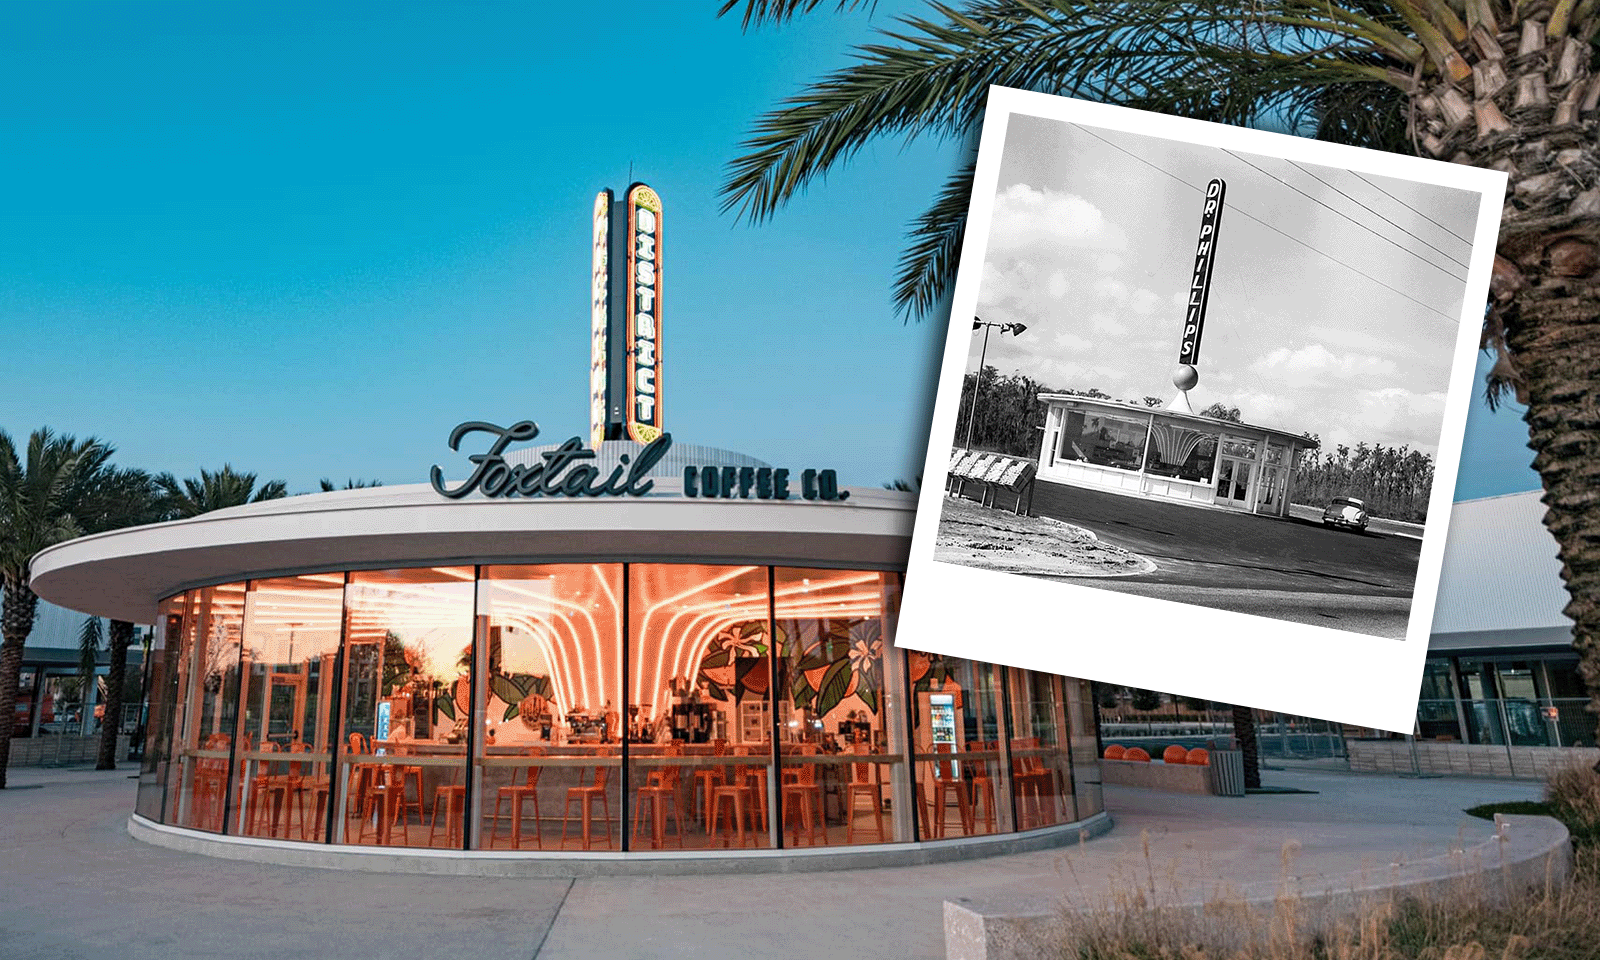 two images of new juice stand in color and old juice stand in black and white